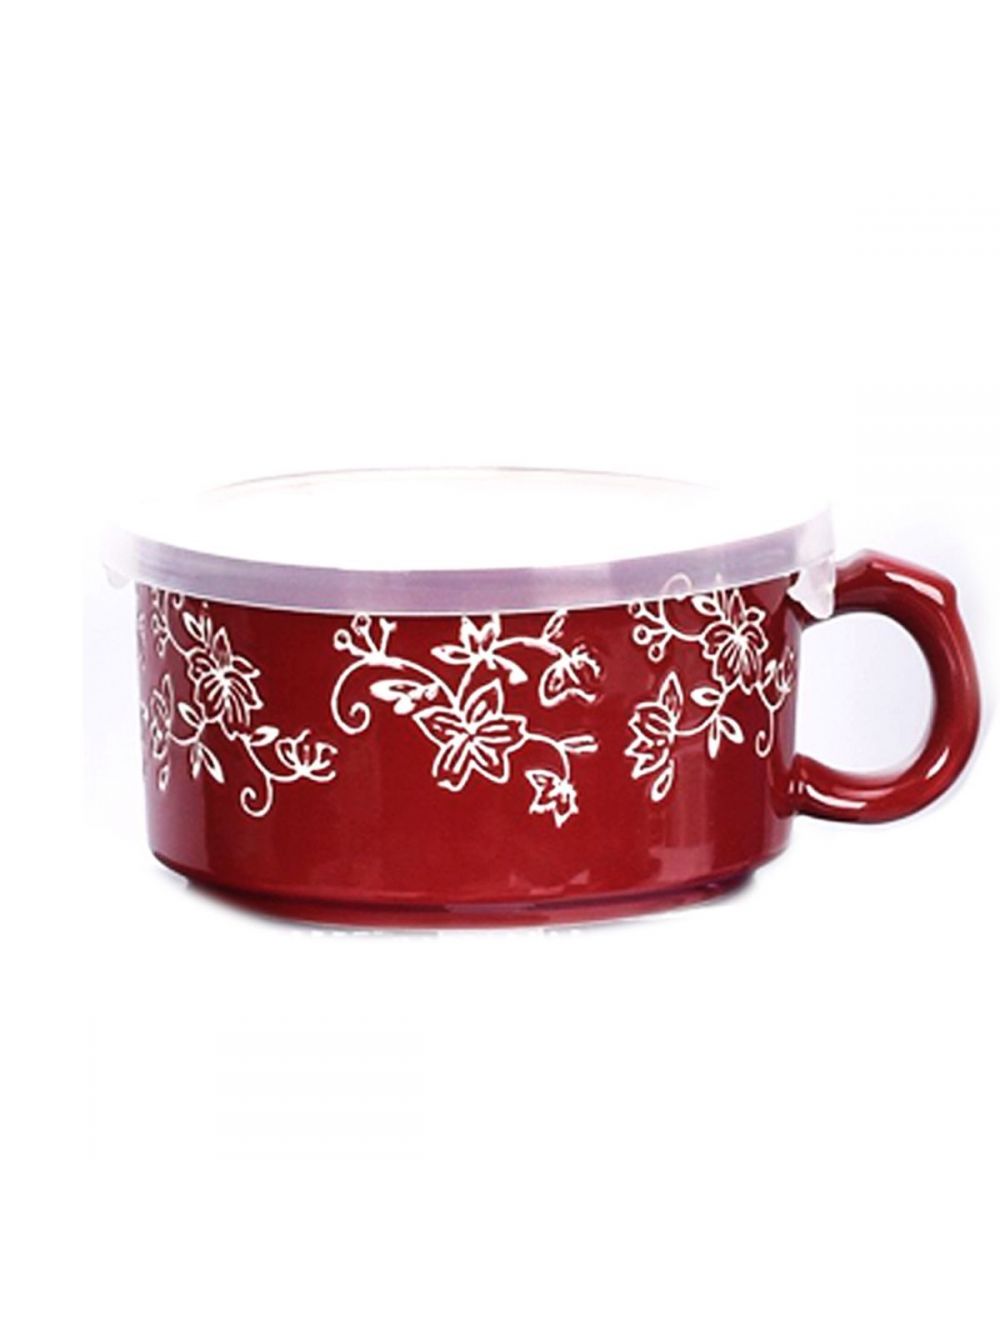 Temp-tations Floral Lace Meal Mug with Gift Box -K50664-237-01